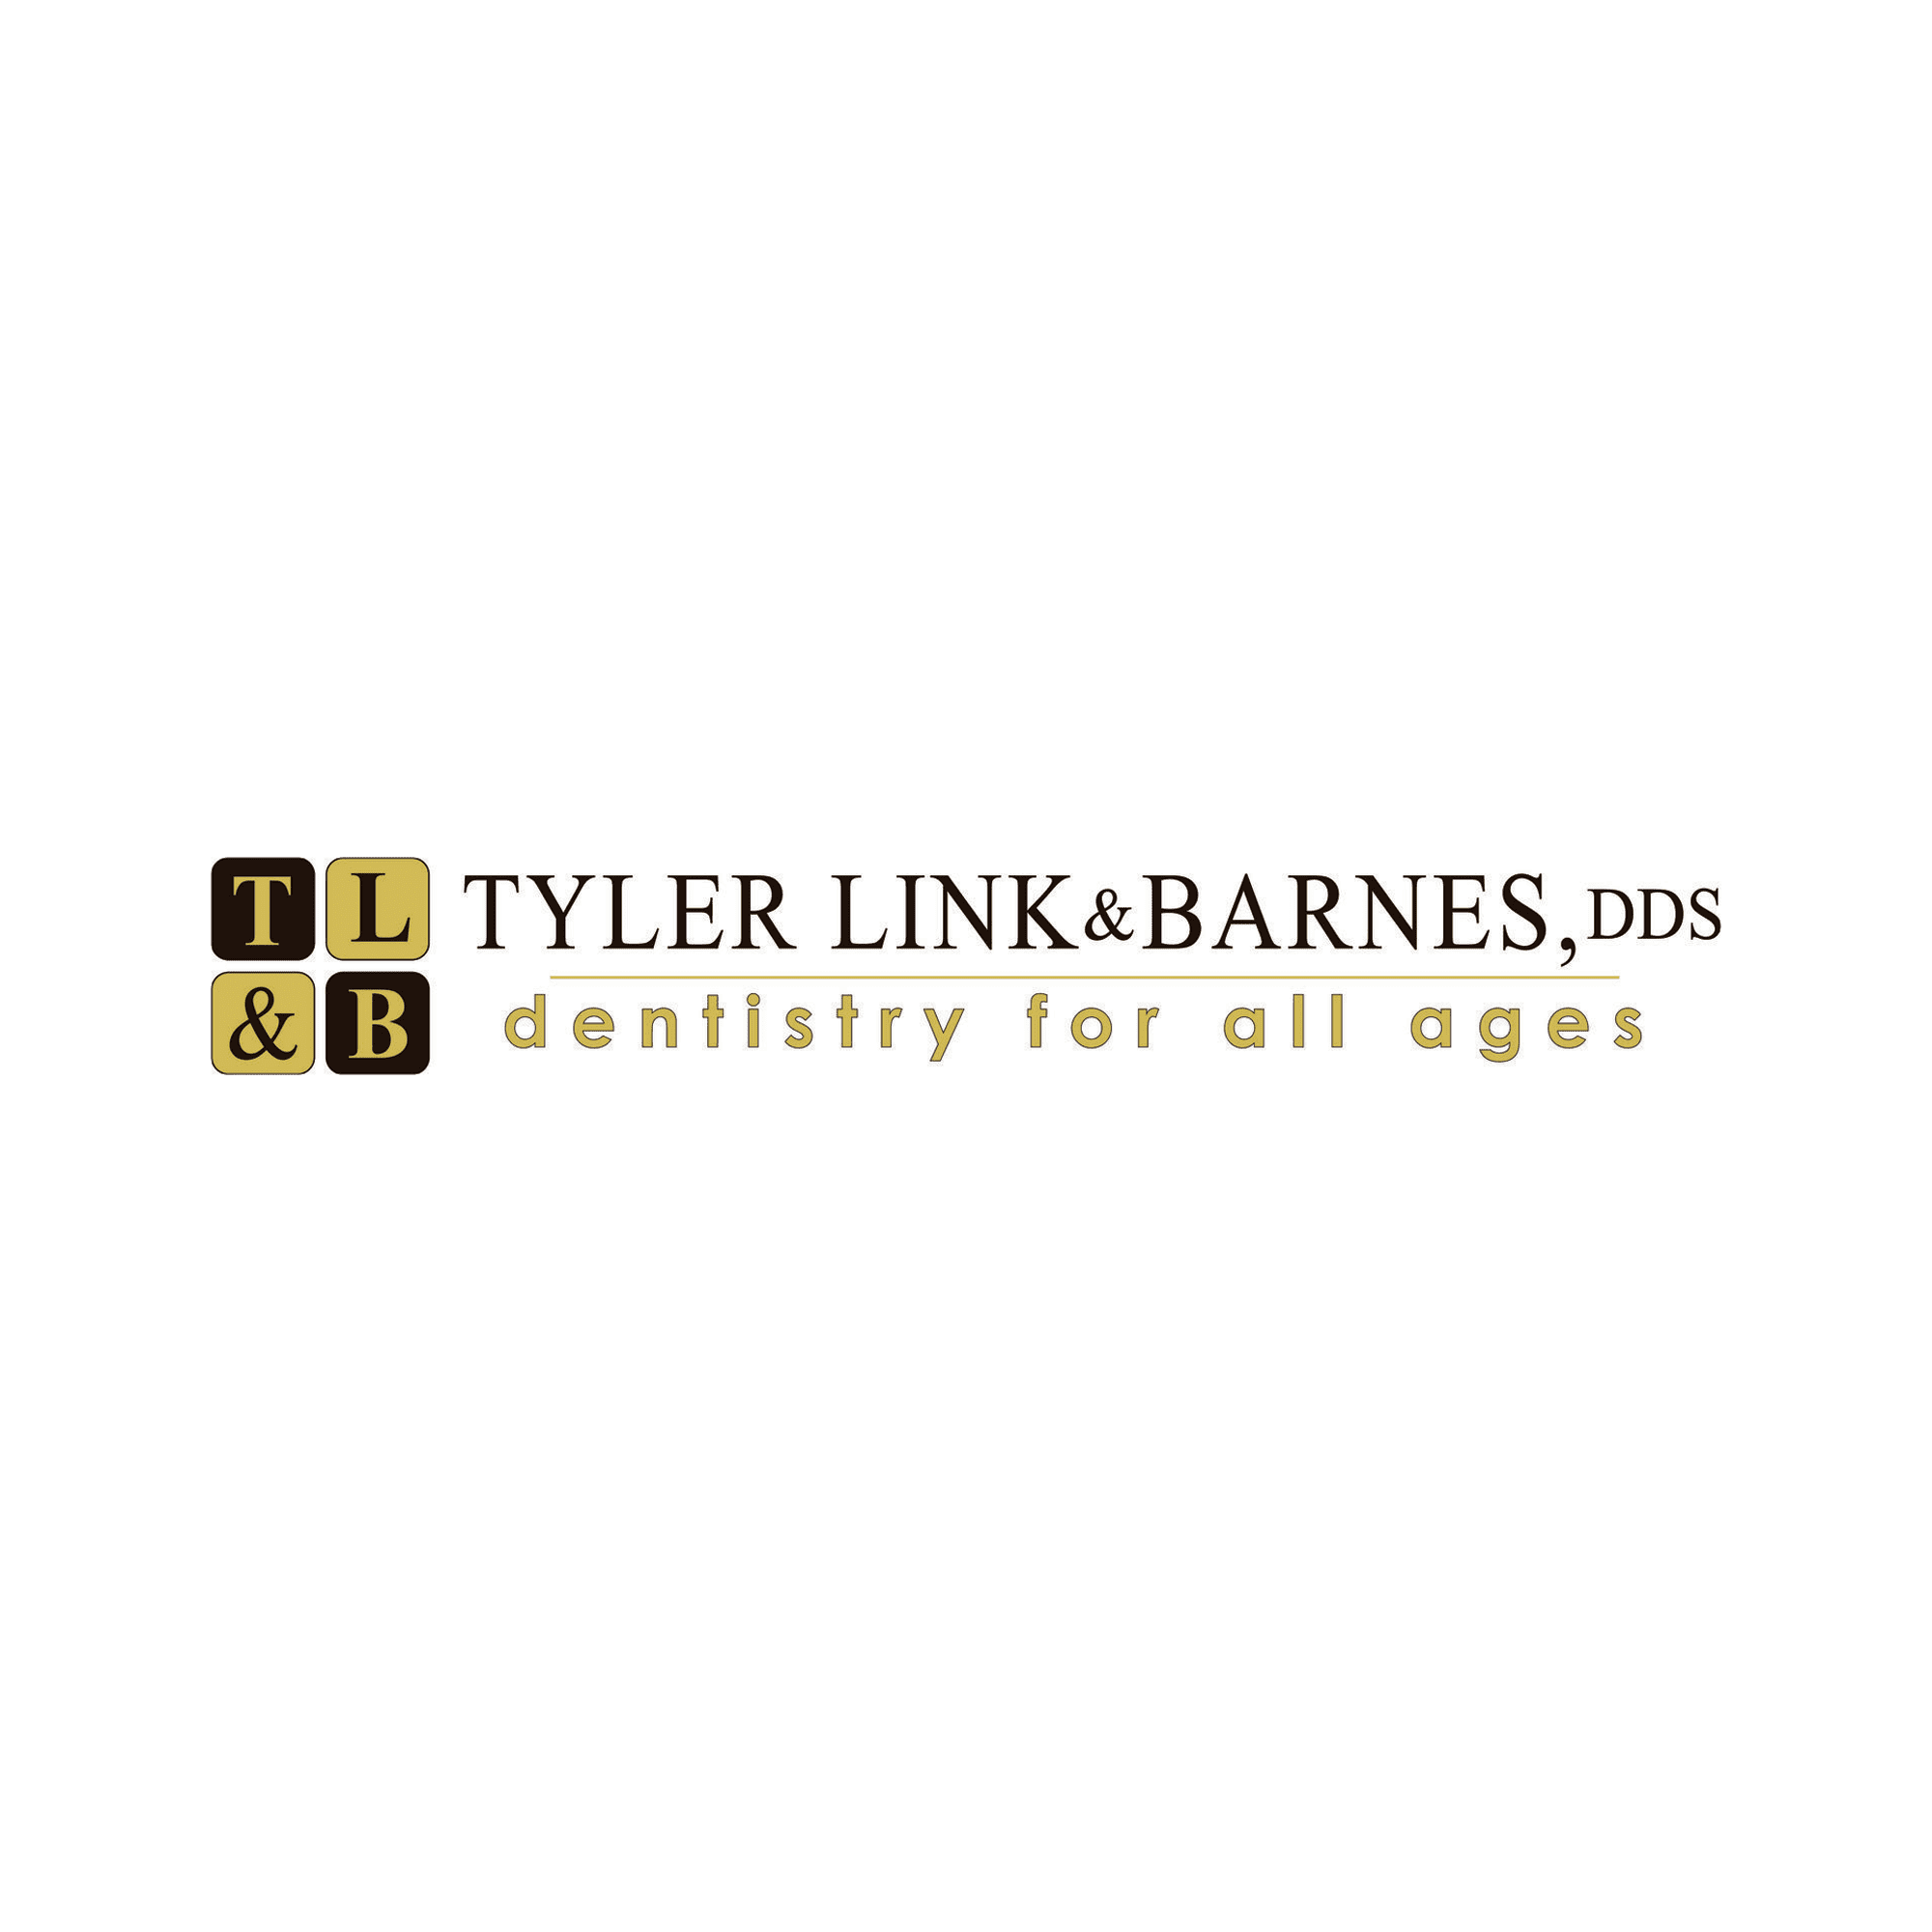 Tyler Link, & Barnes, DDS, is a Reveal Provider